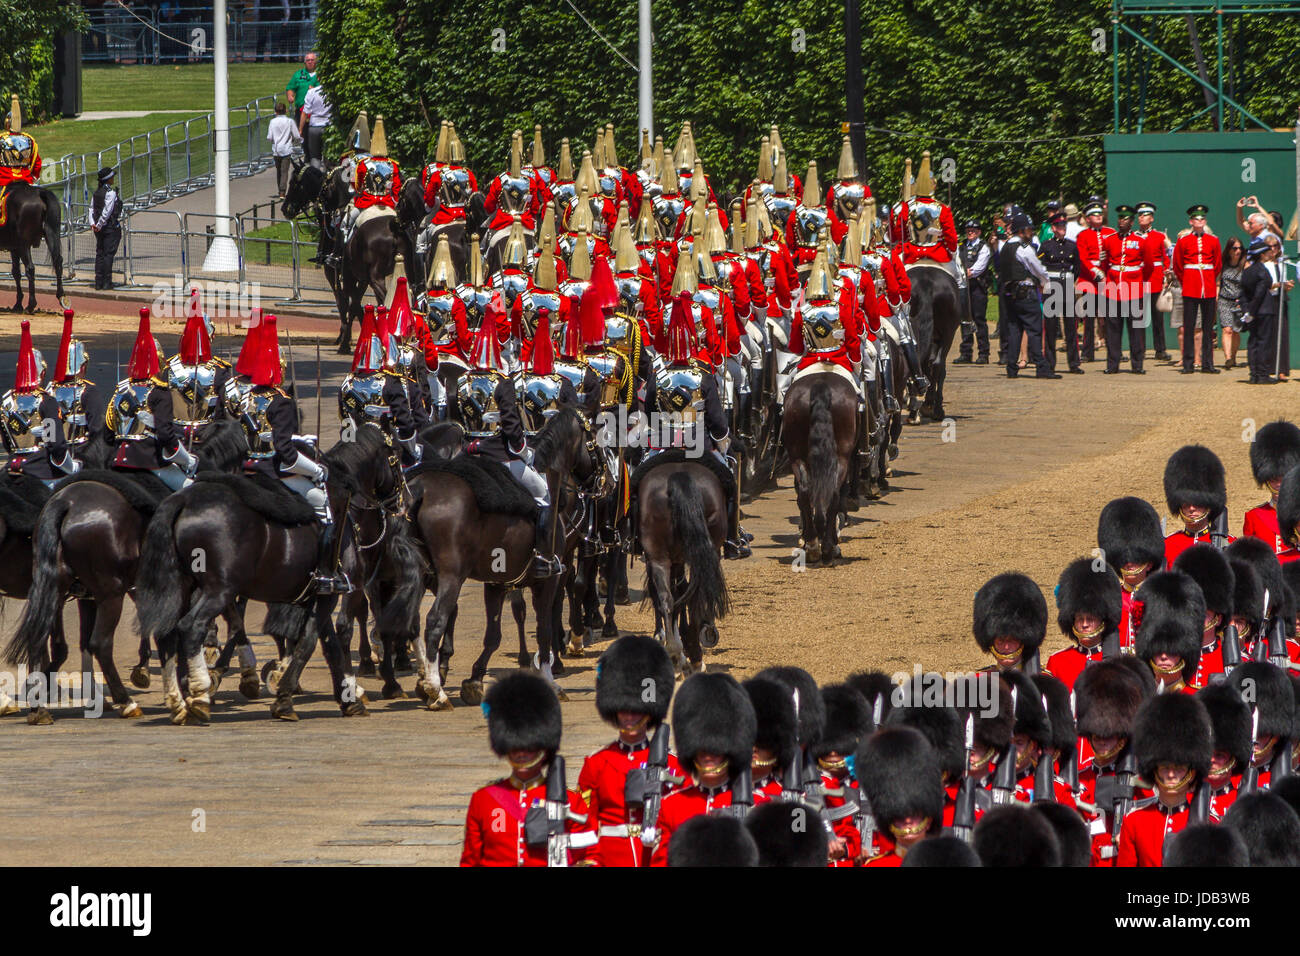 The Life Guards on horseback leaving Horse Guards Parade ground To walk back down The Mall at Trooping The Colour, London ,UK, 2017 Stock Photo